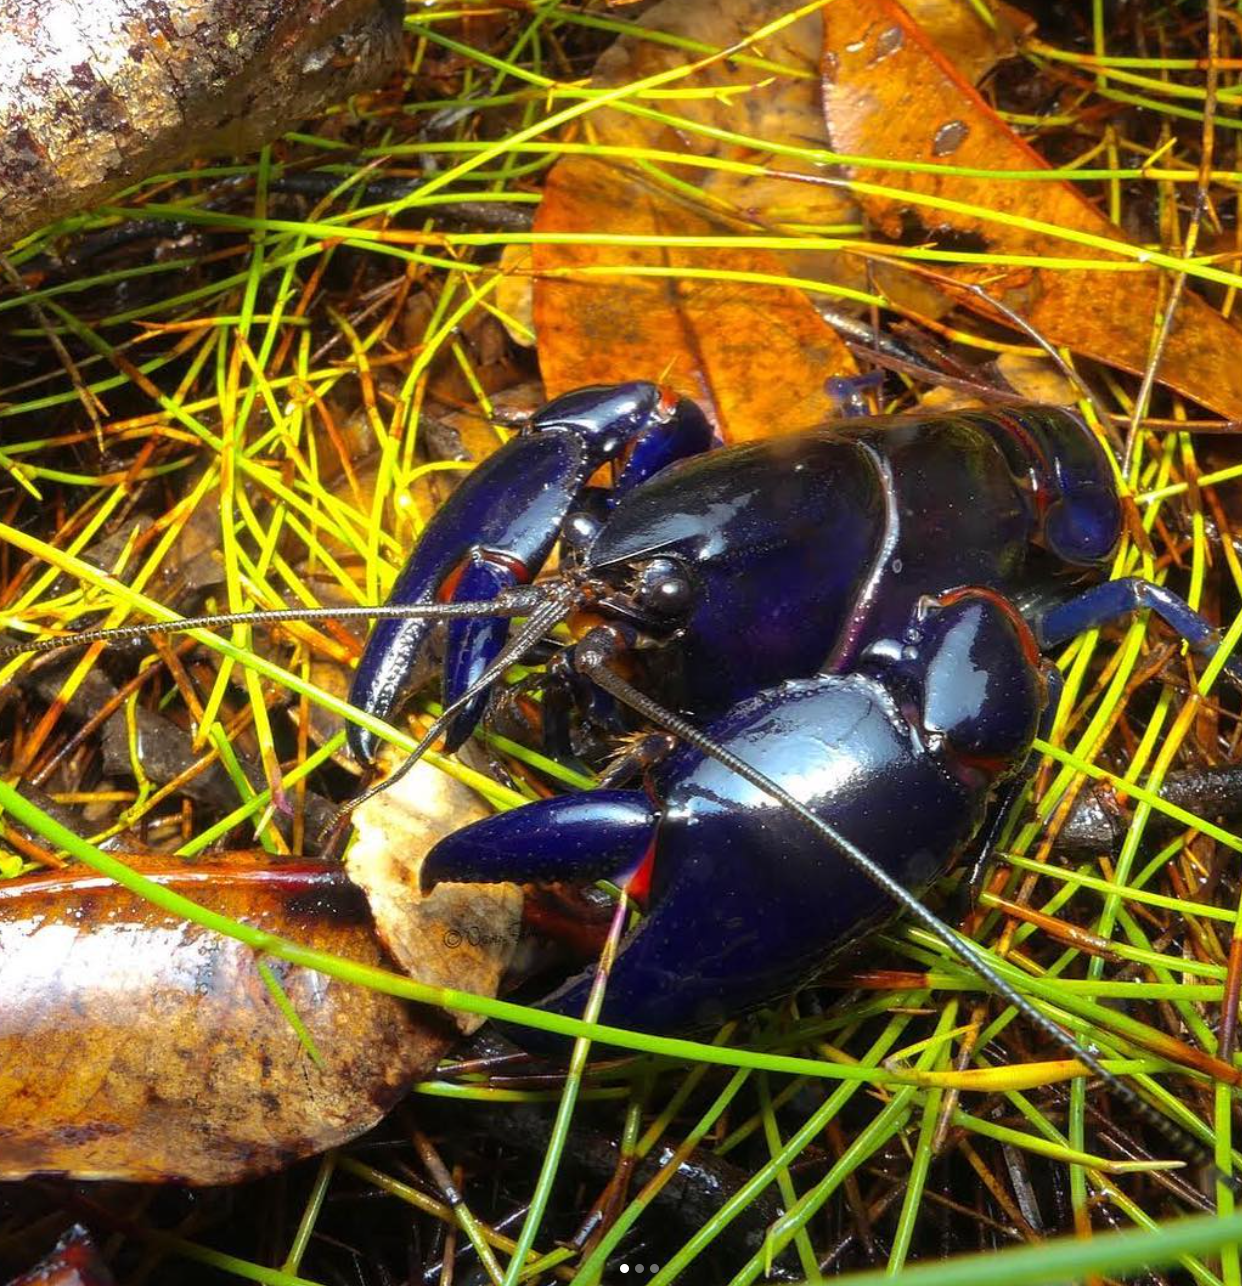 Swamp crayfish (C.robustus), Mooloolah River NP. Photo by Ollie Scully